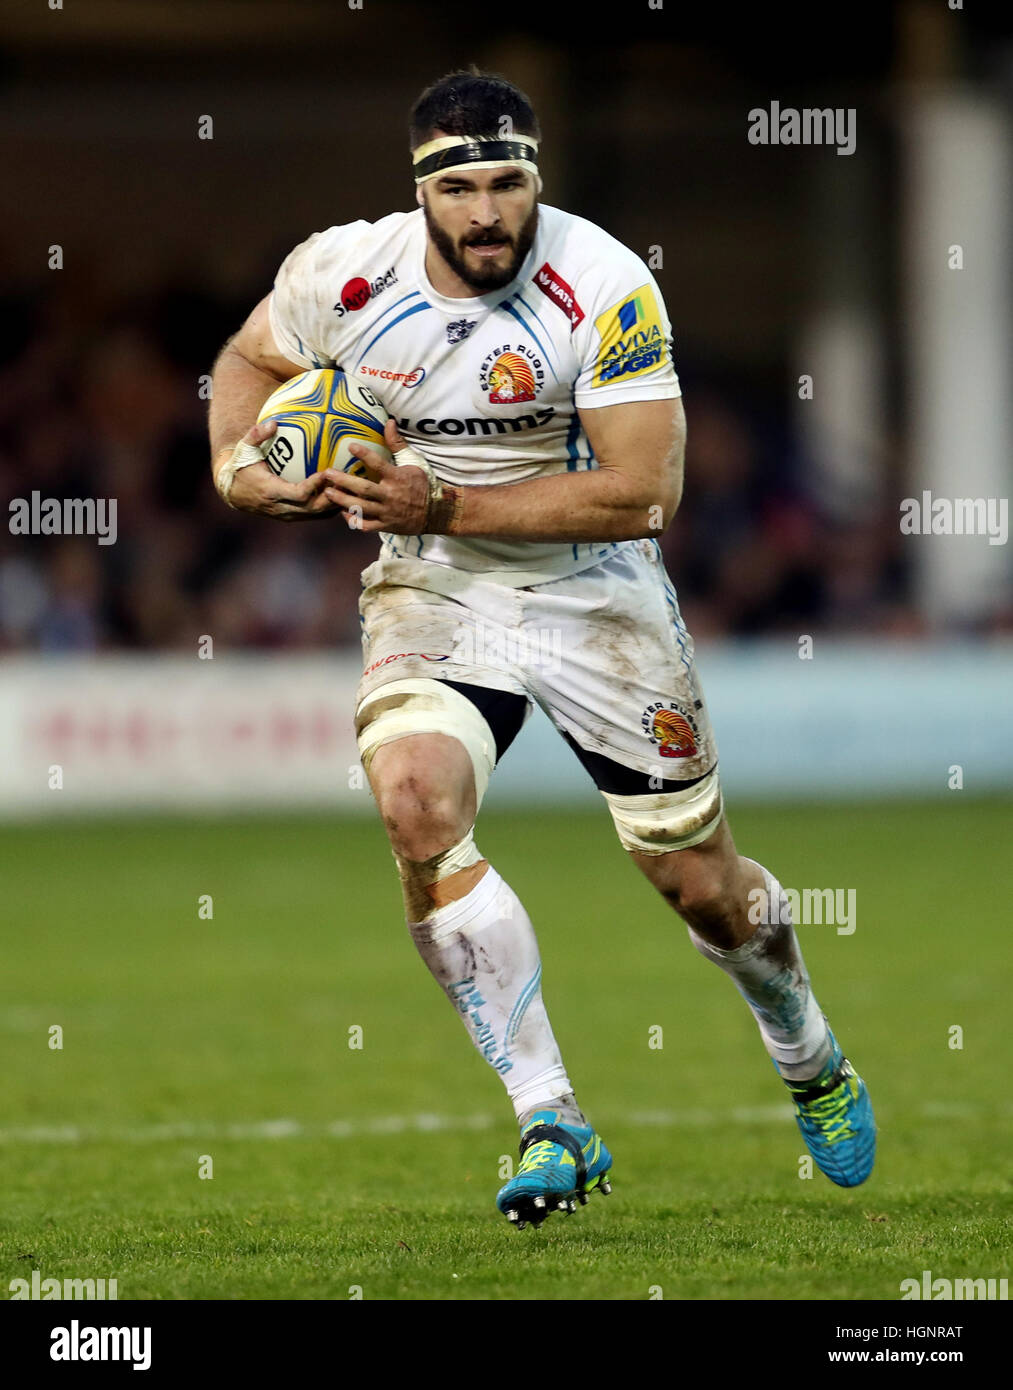 Exeter's Don Armand  during the Aviva Premiership match at the Recreation Ground, Bath. PRESS ASSOCIATION Photo. Picture date: Saturday December 31, 2016. See PA story RUGBYU Bath. Photo credit should read: David Davies/PA Wire. RESTRICTIONS: Editorial use only. No commercial use. Stock Photo